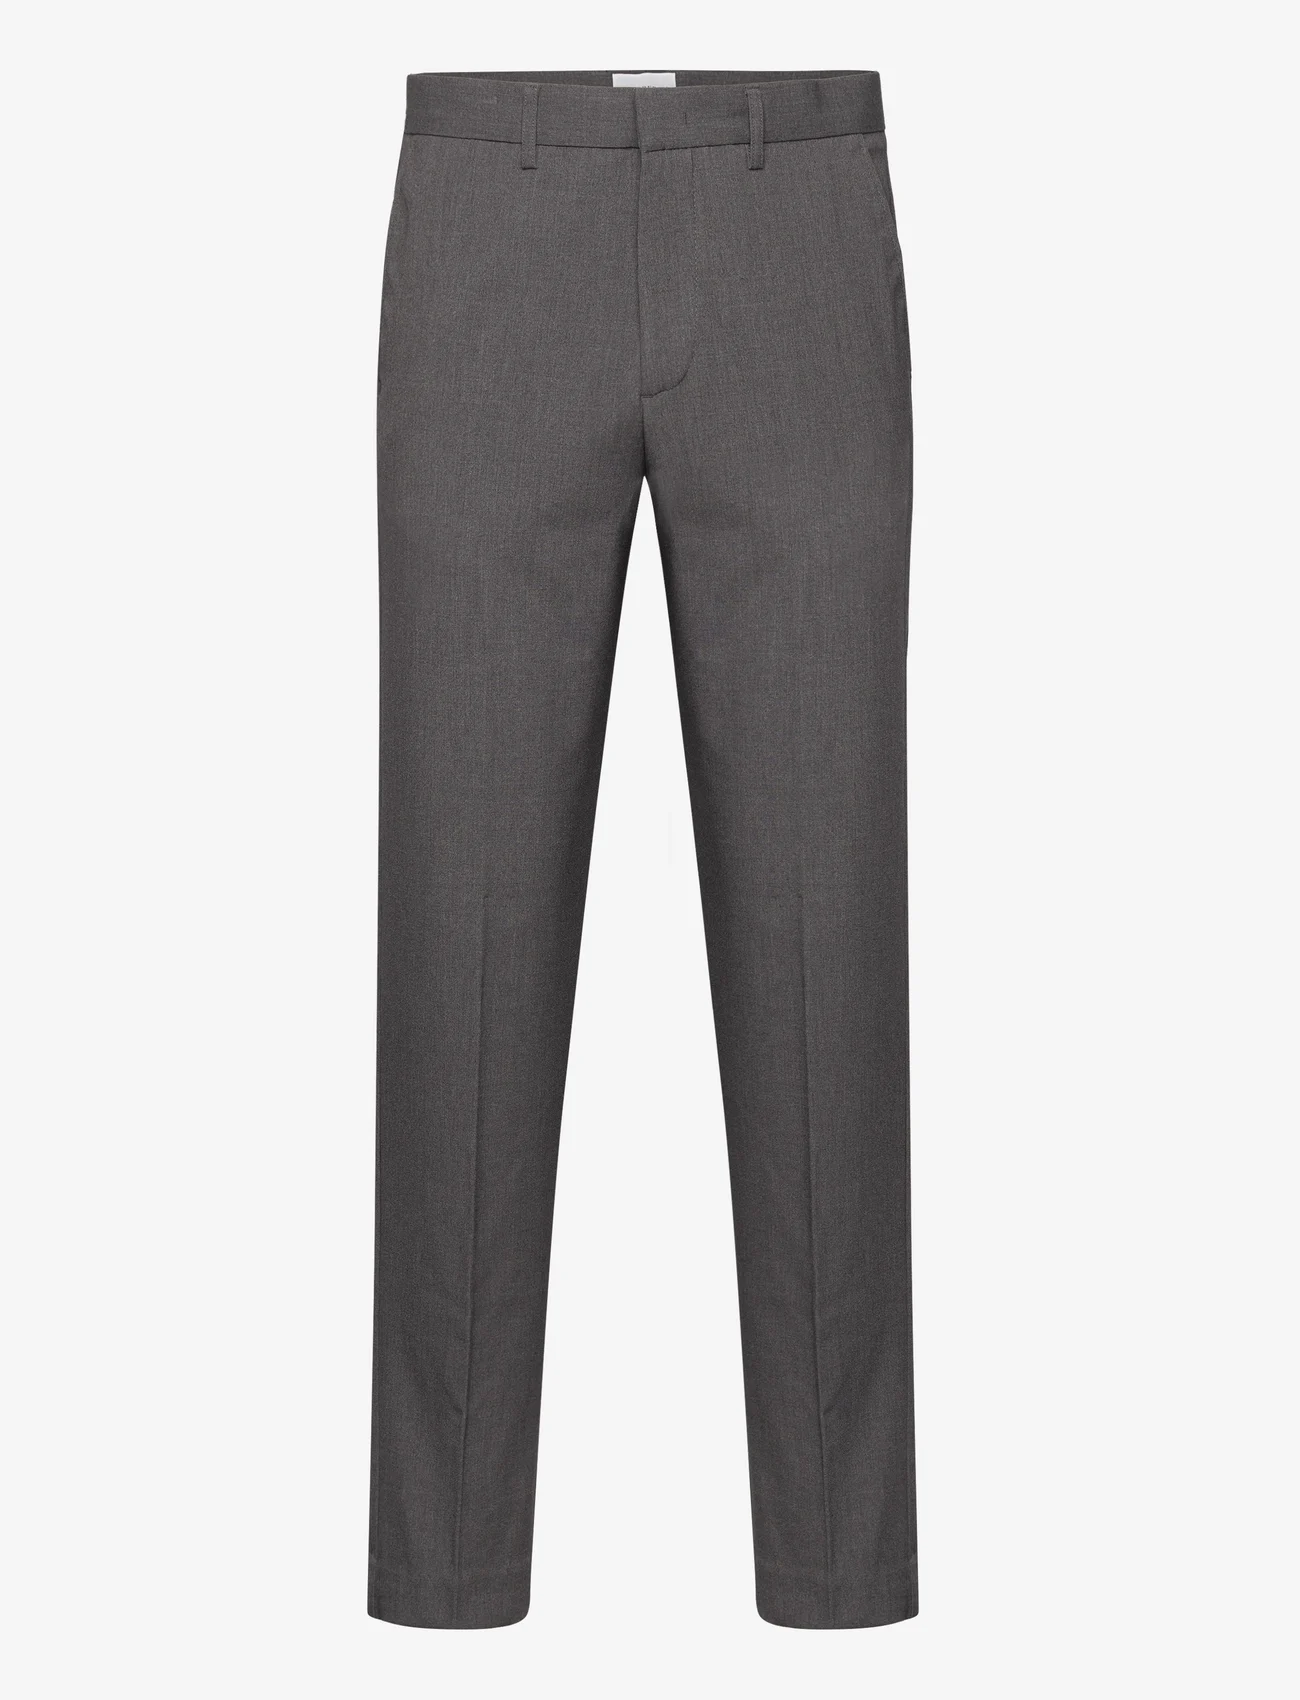 Lindbergh - Relaxed fit formal pants - suit trousers - grey mix - 0